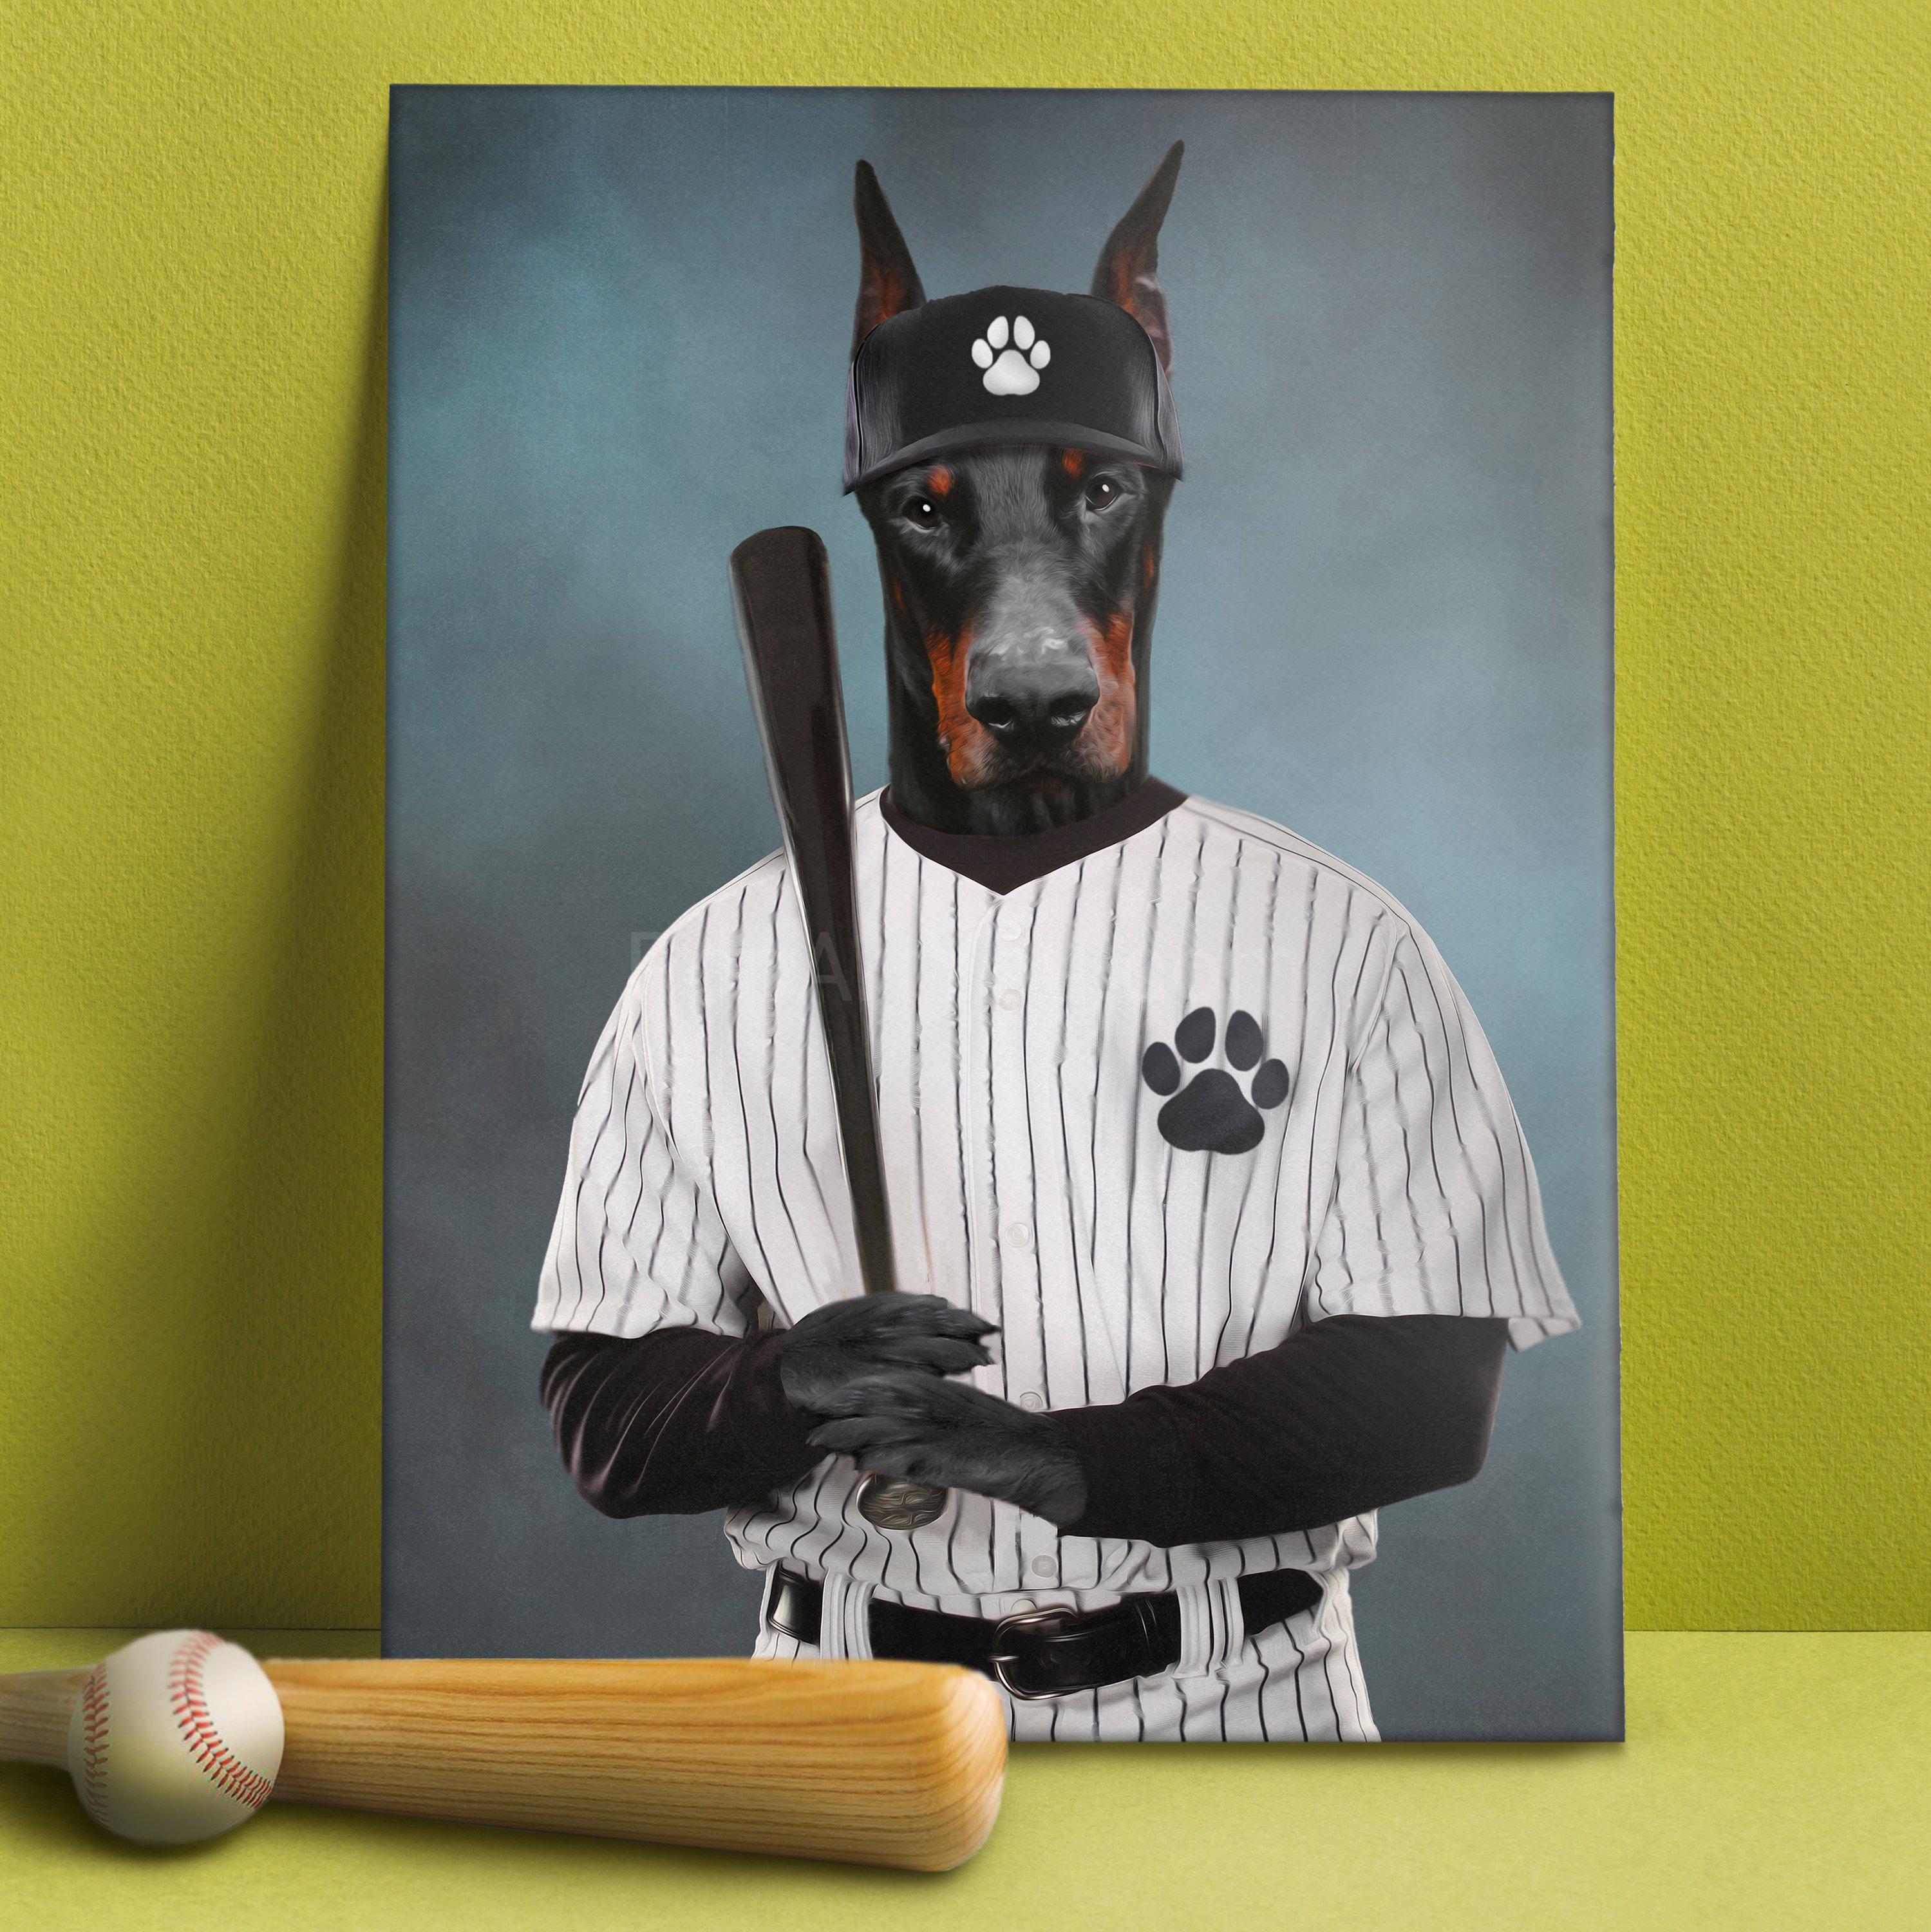 Portrait of a dog with a human body dressed in white baseball attire with a bat standing on a green table near the bat